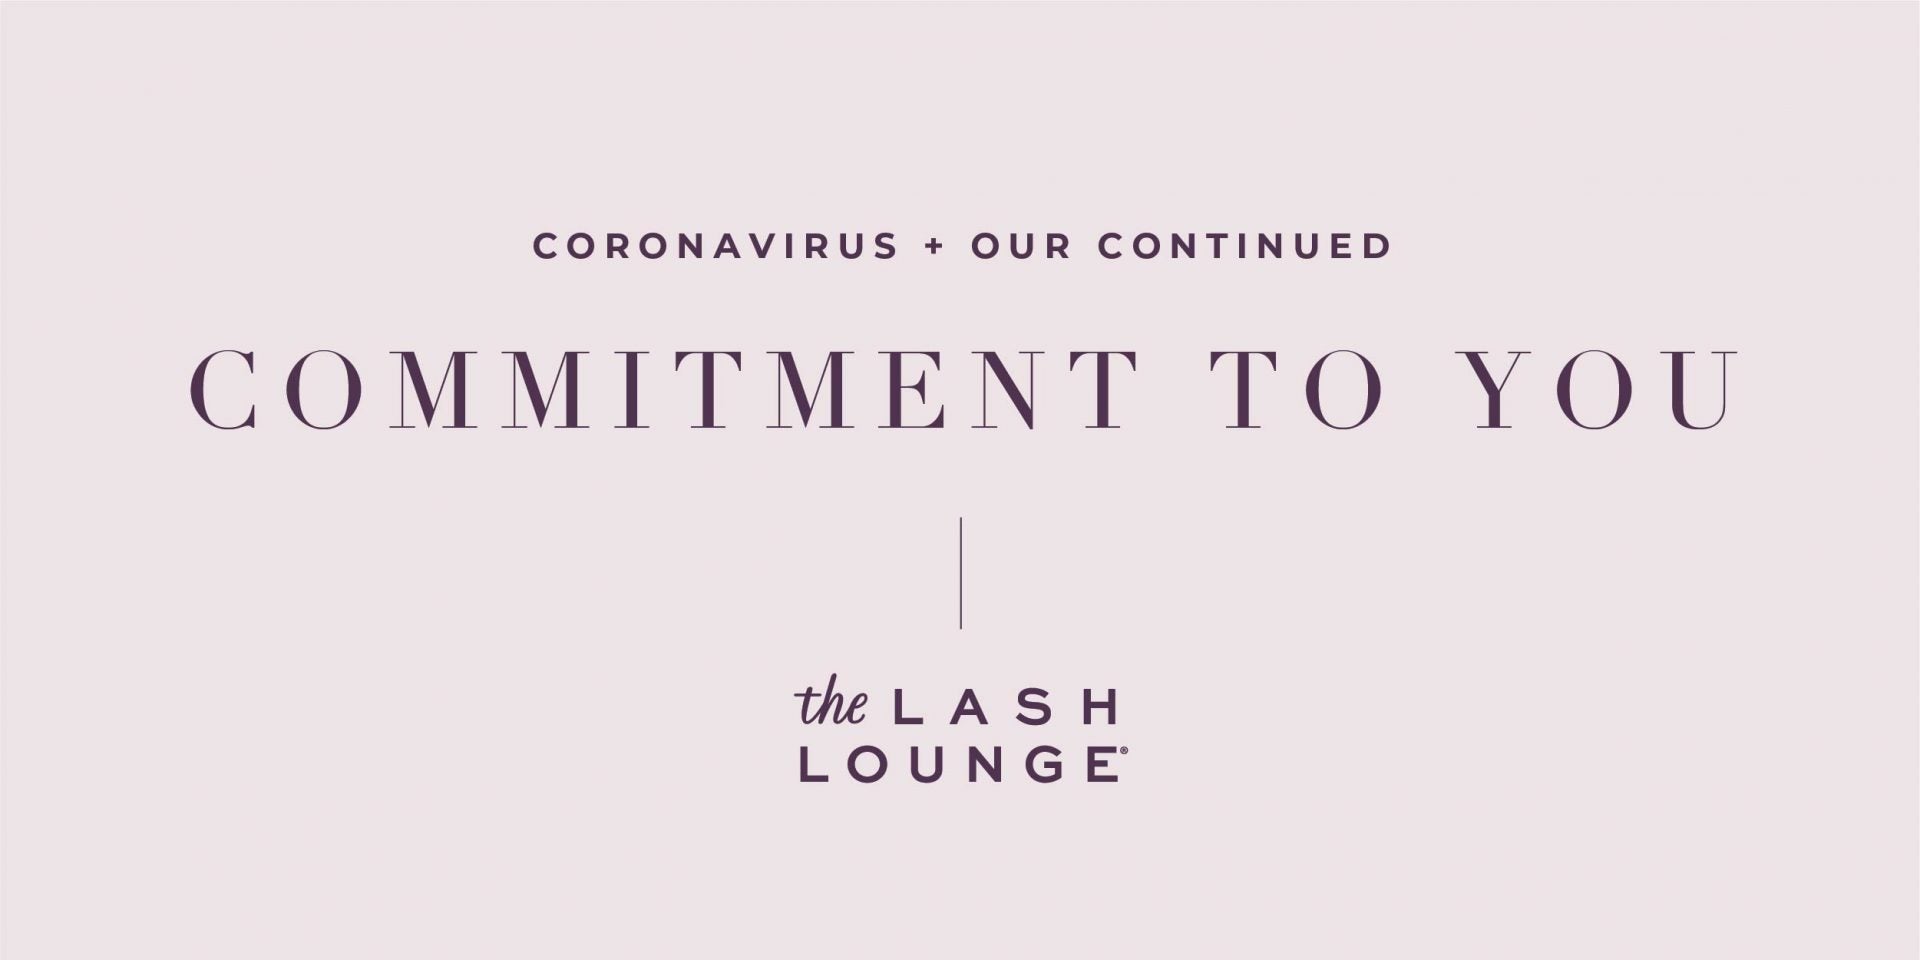 Covid Update "Commitment to You" from The Lash Lounge